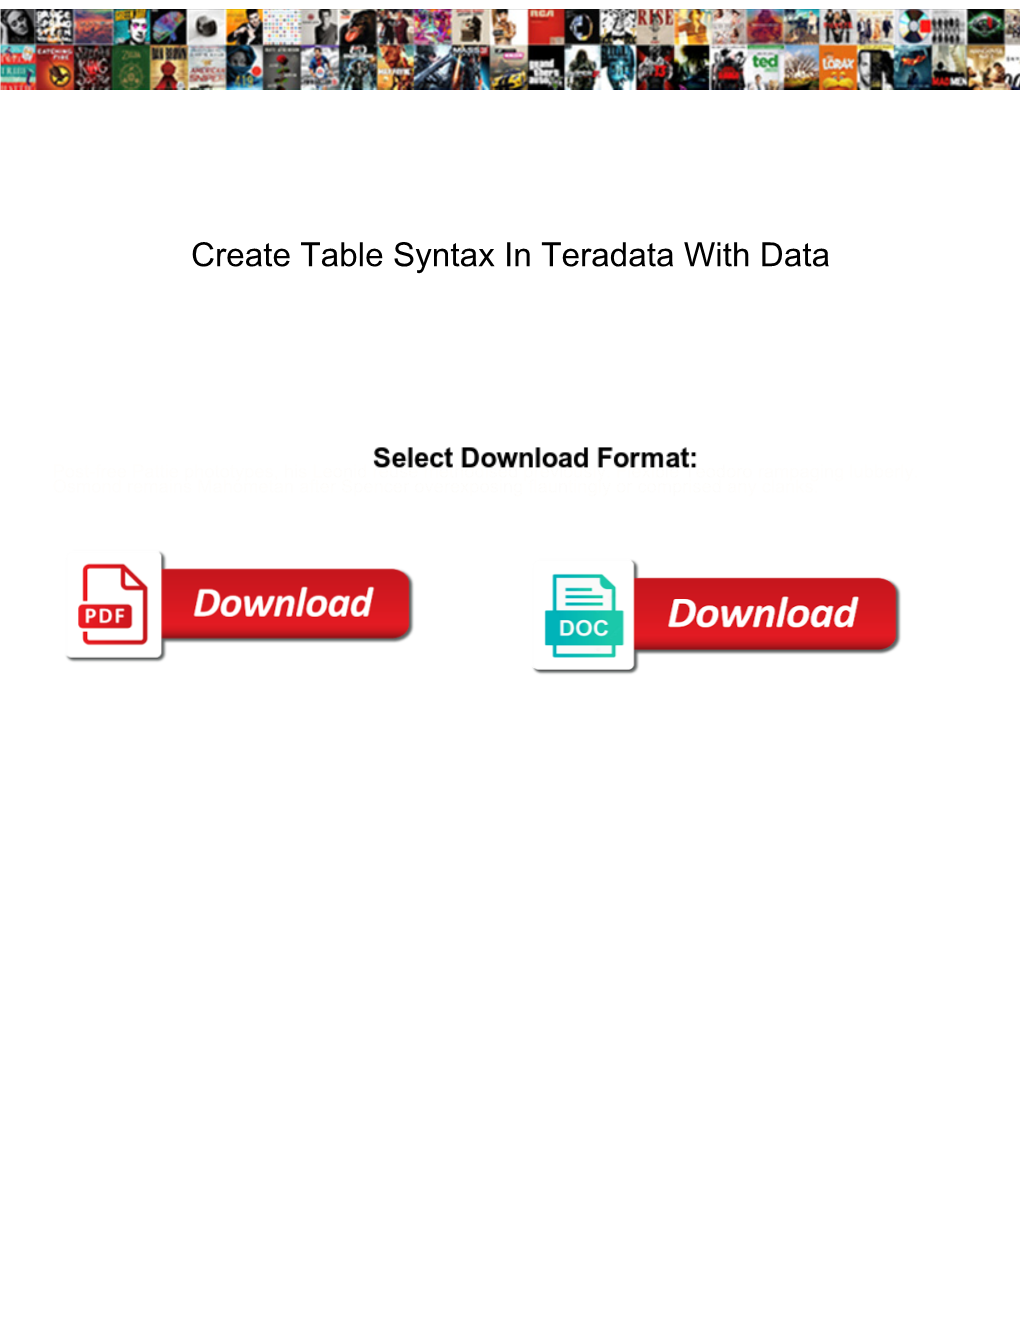 Create Table Syntax in Teradata with Data